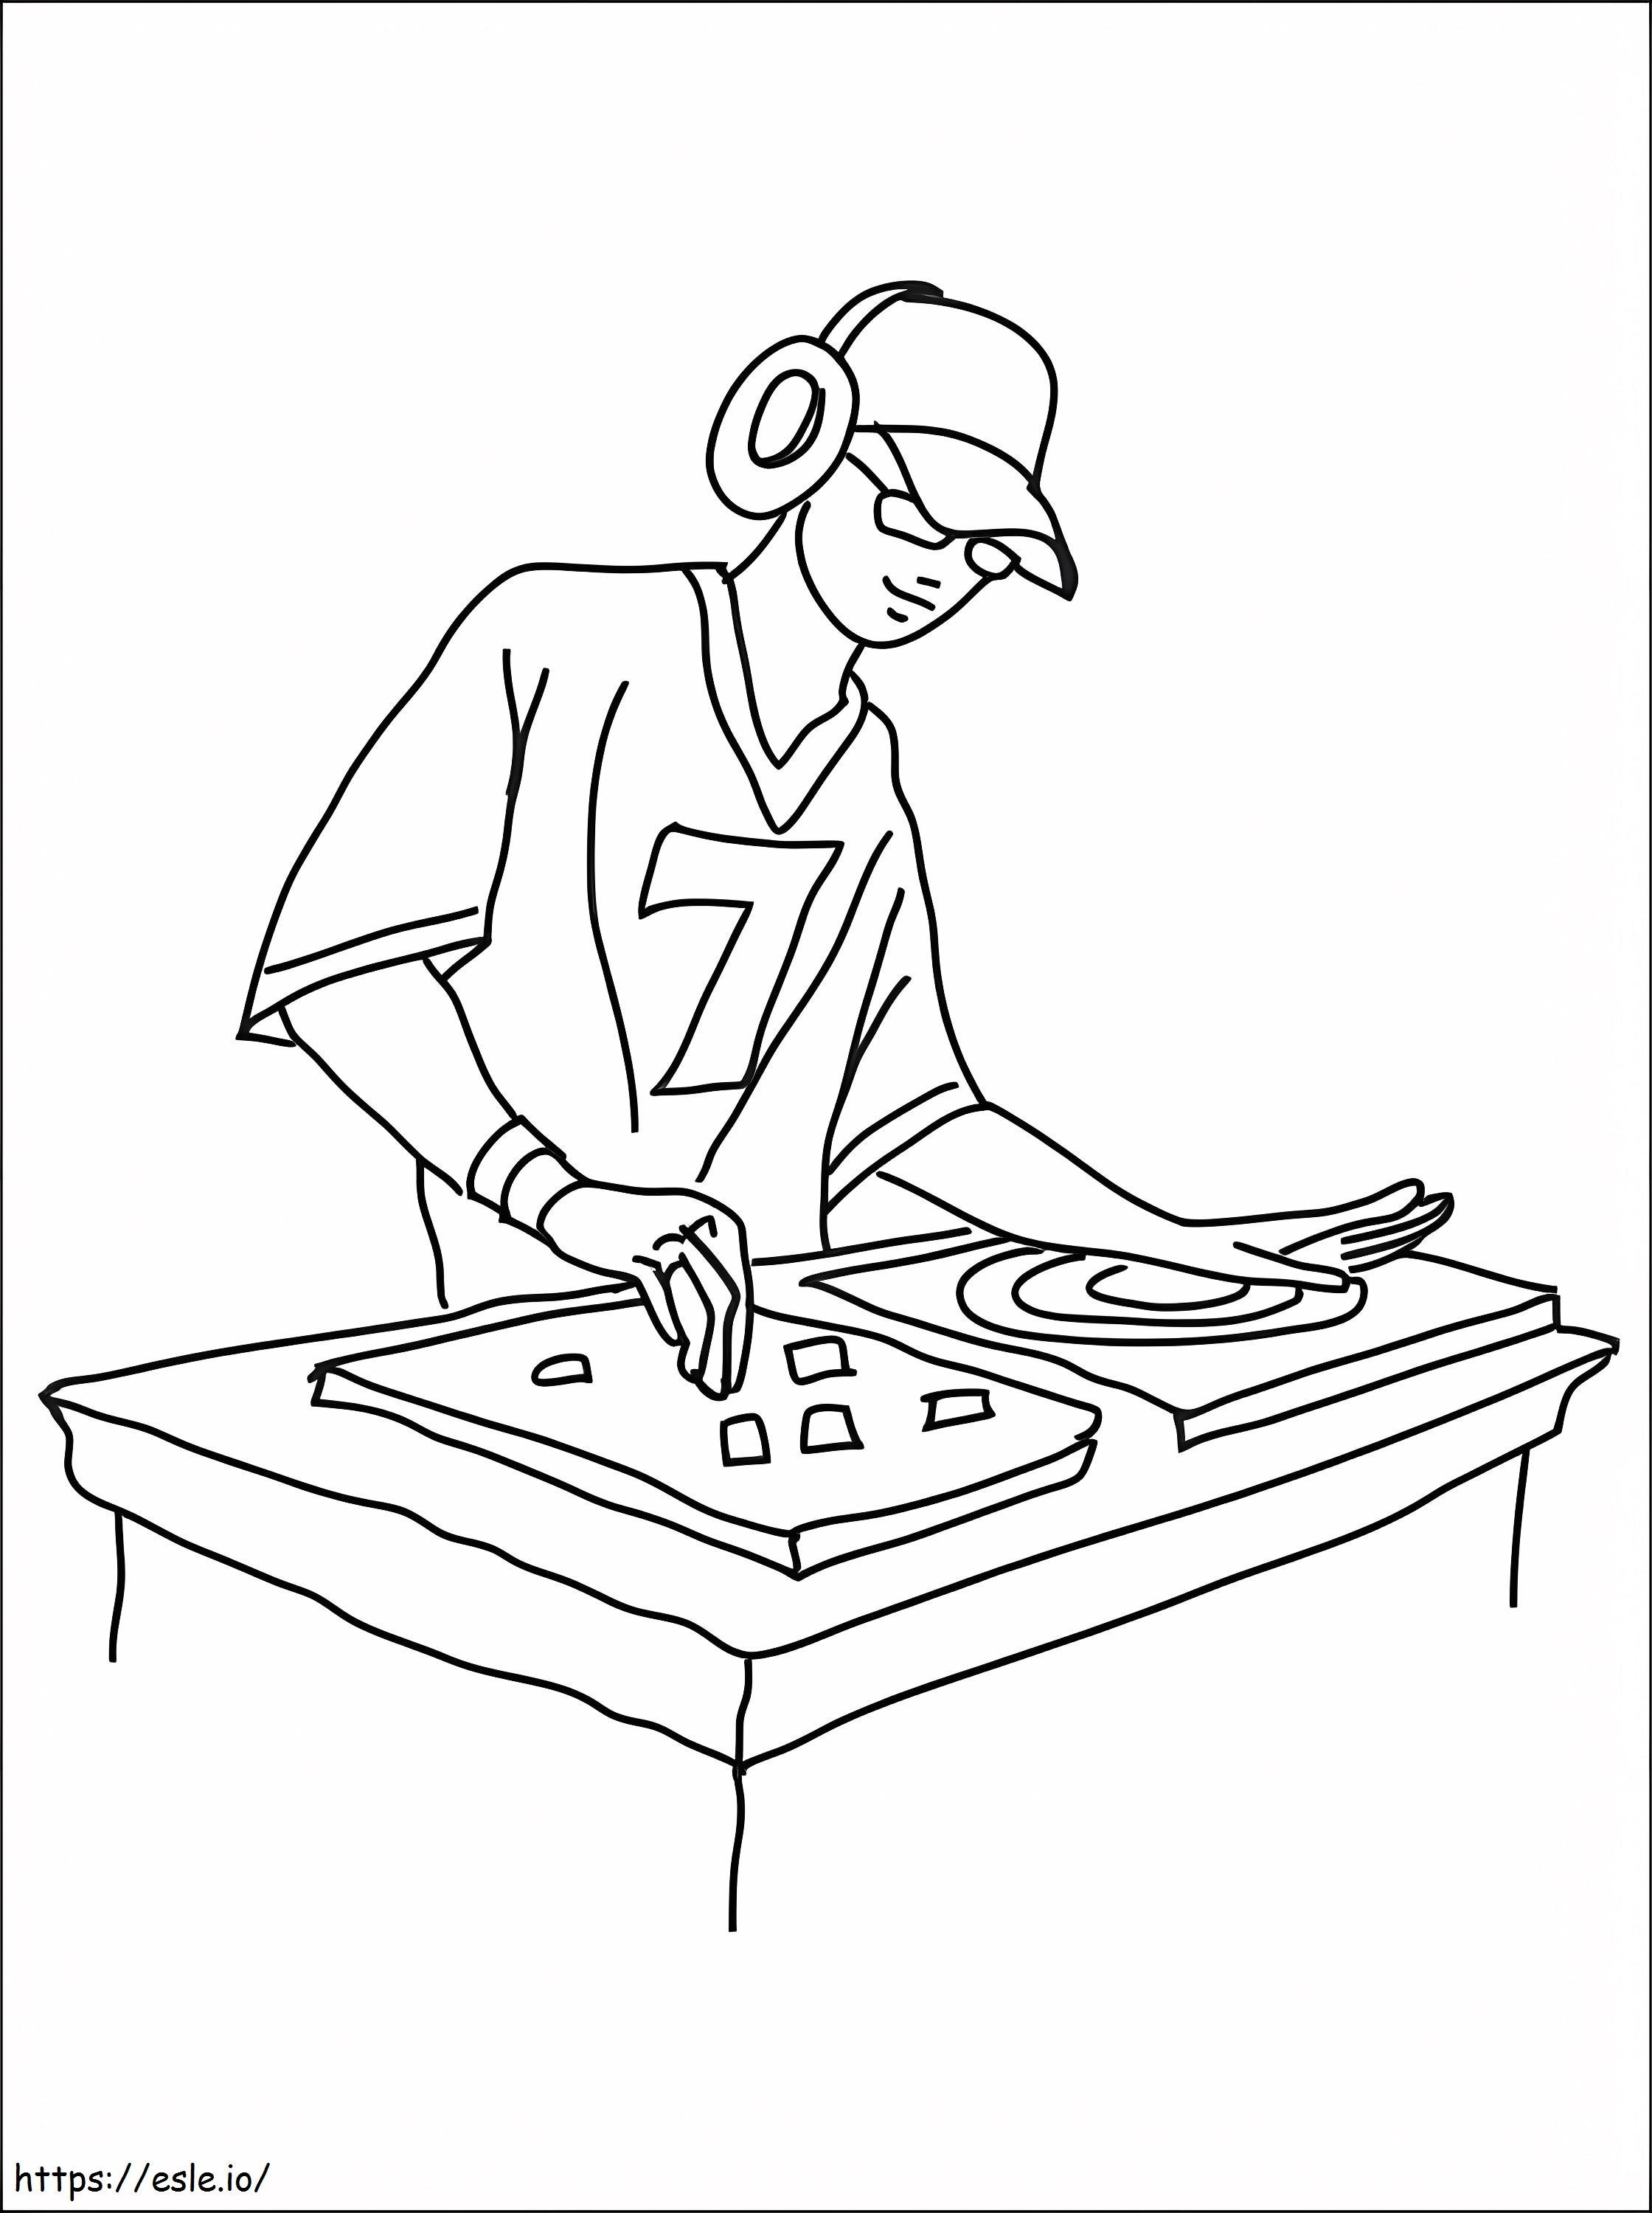 Young Dj coloring page